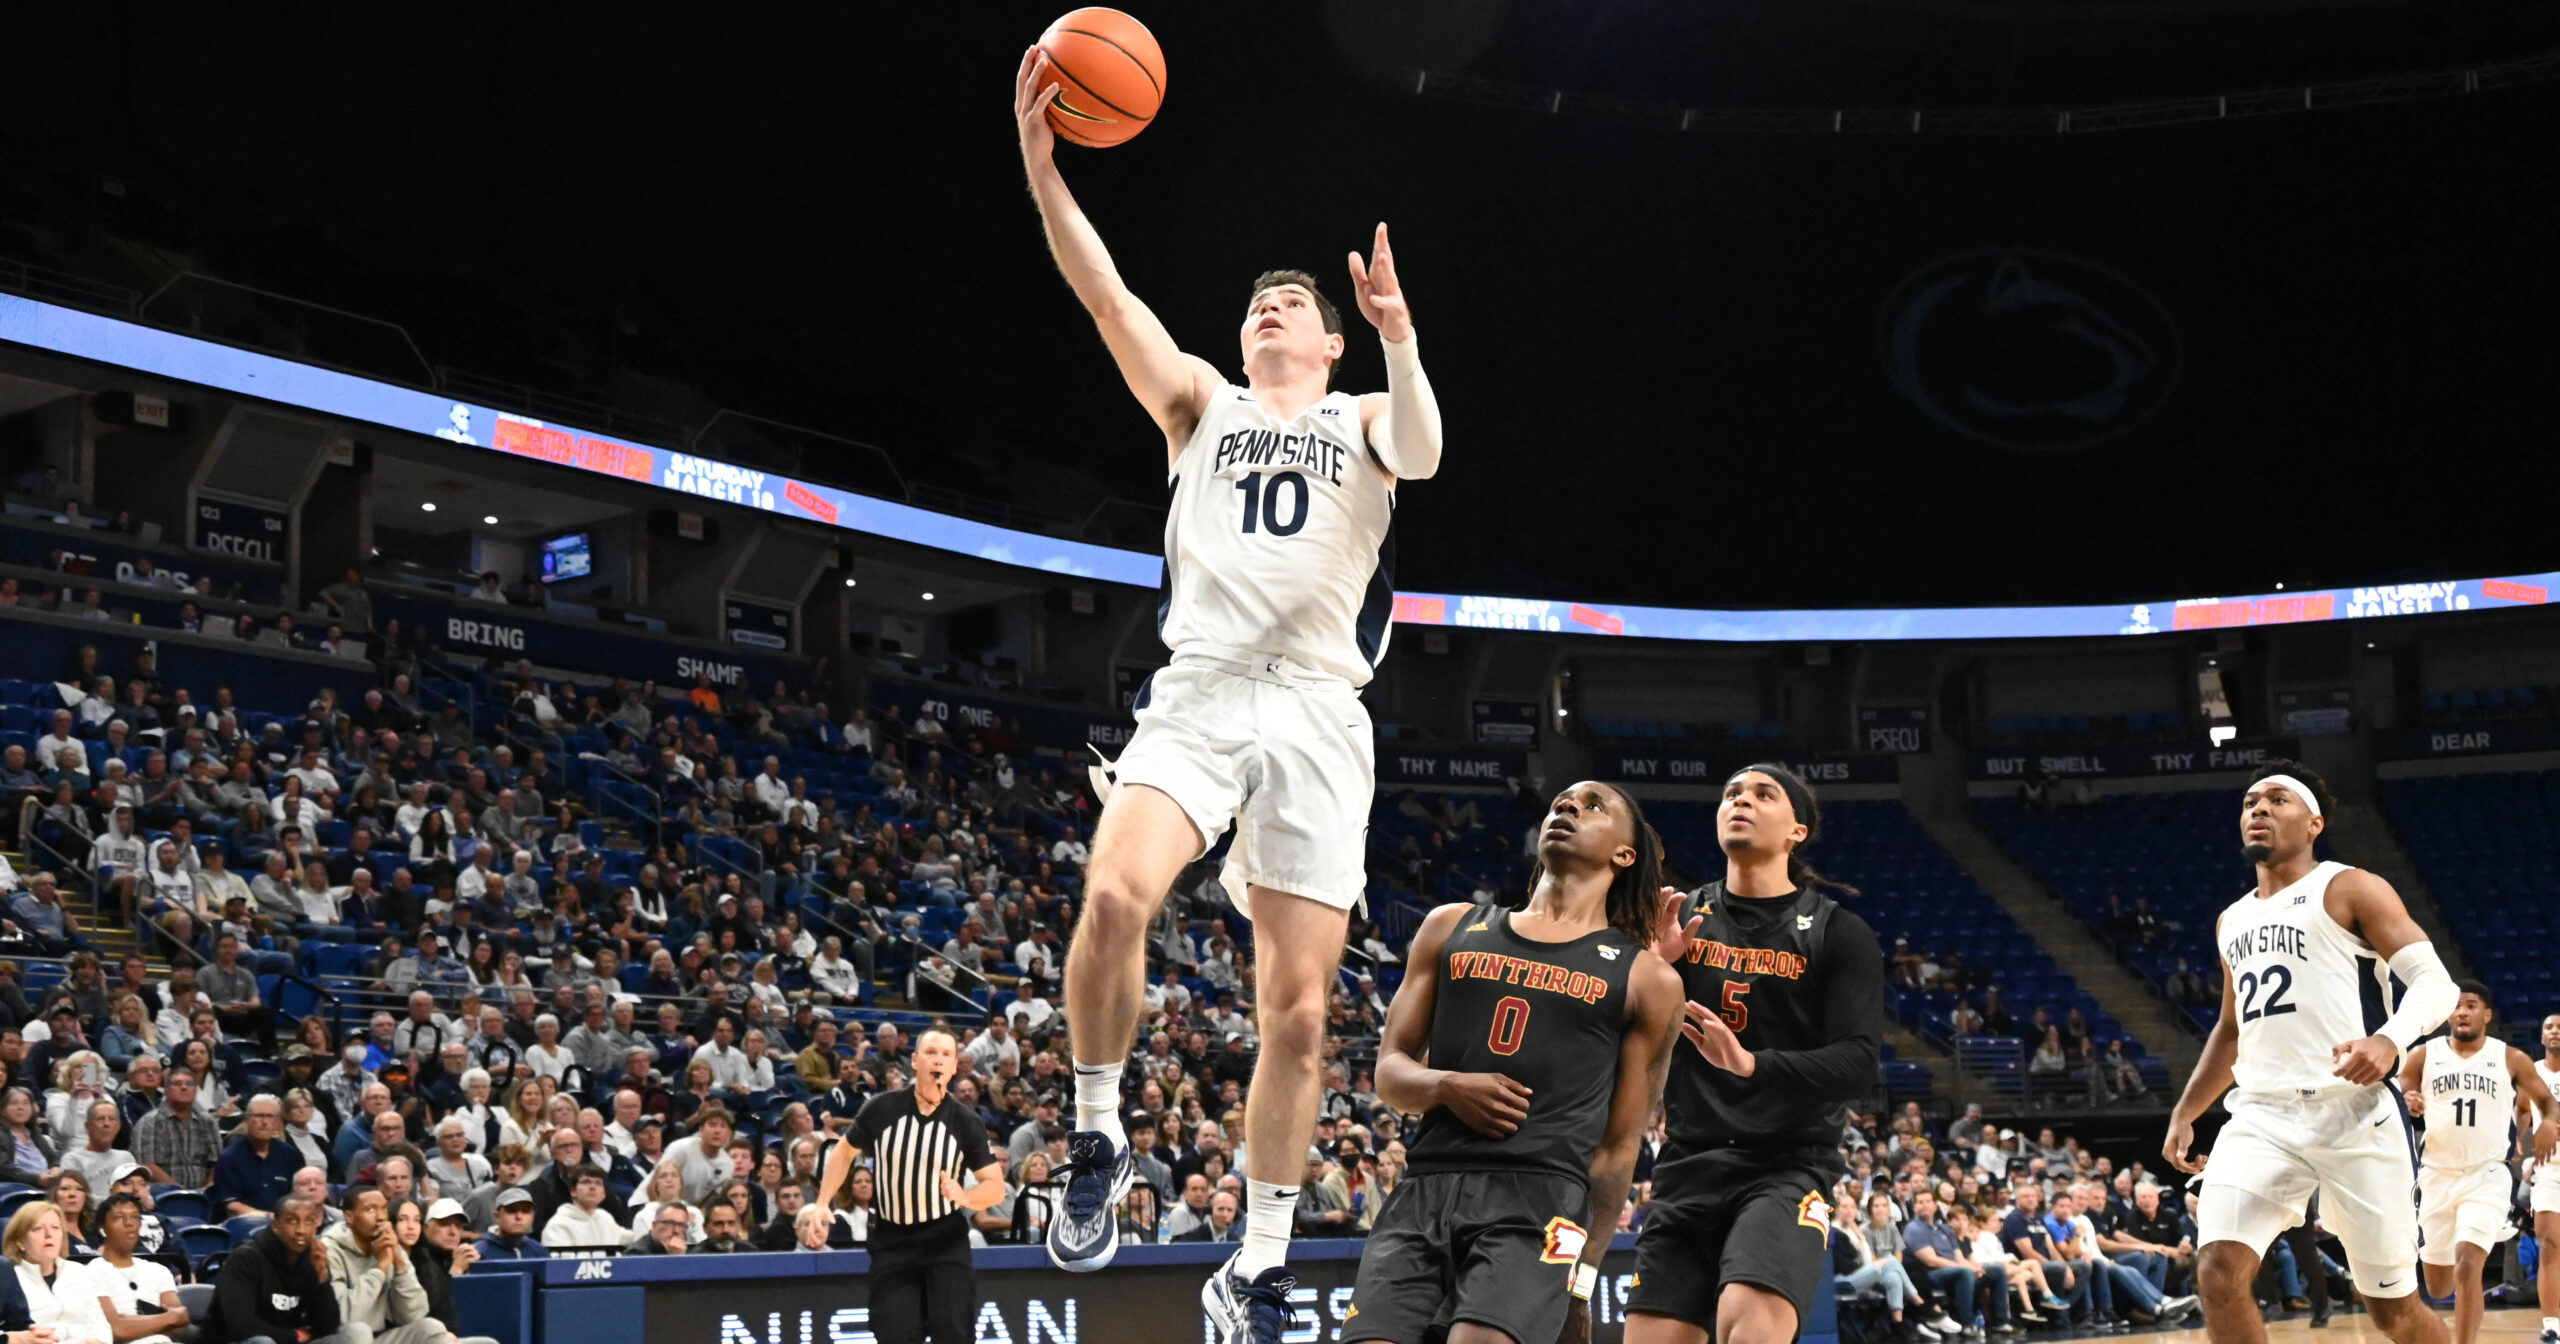 Penn State guard Andrew Funk